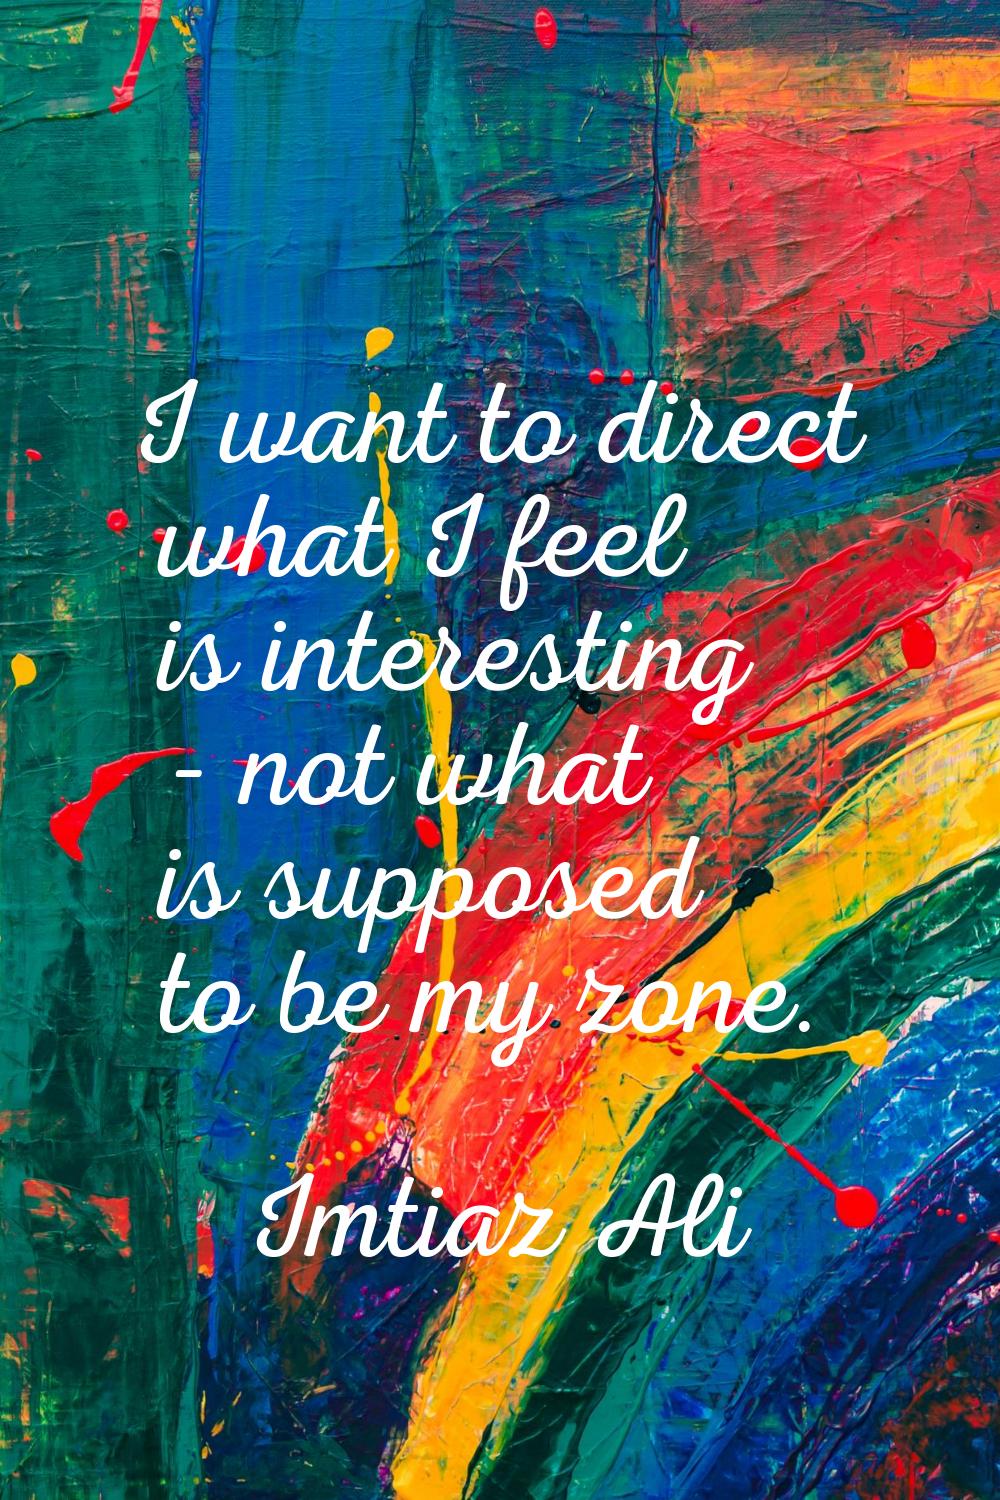 I want to direct what I feel is interesting - not what is supposed to be my zone.